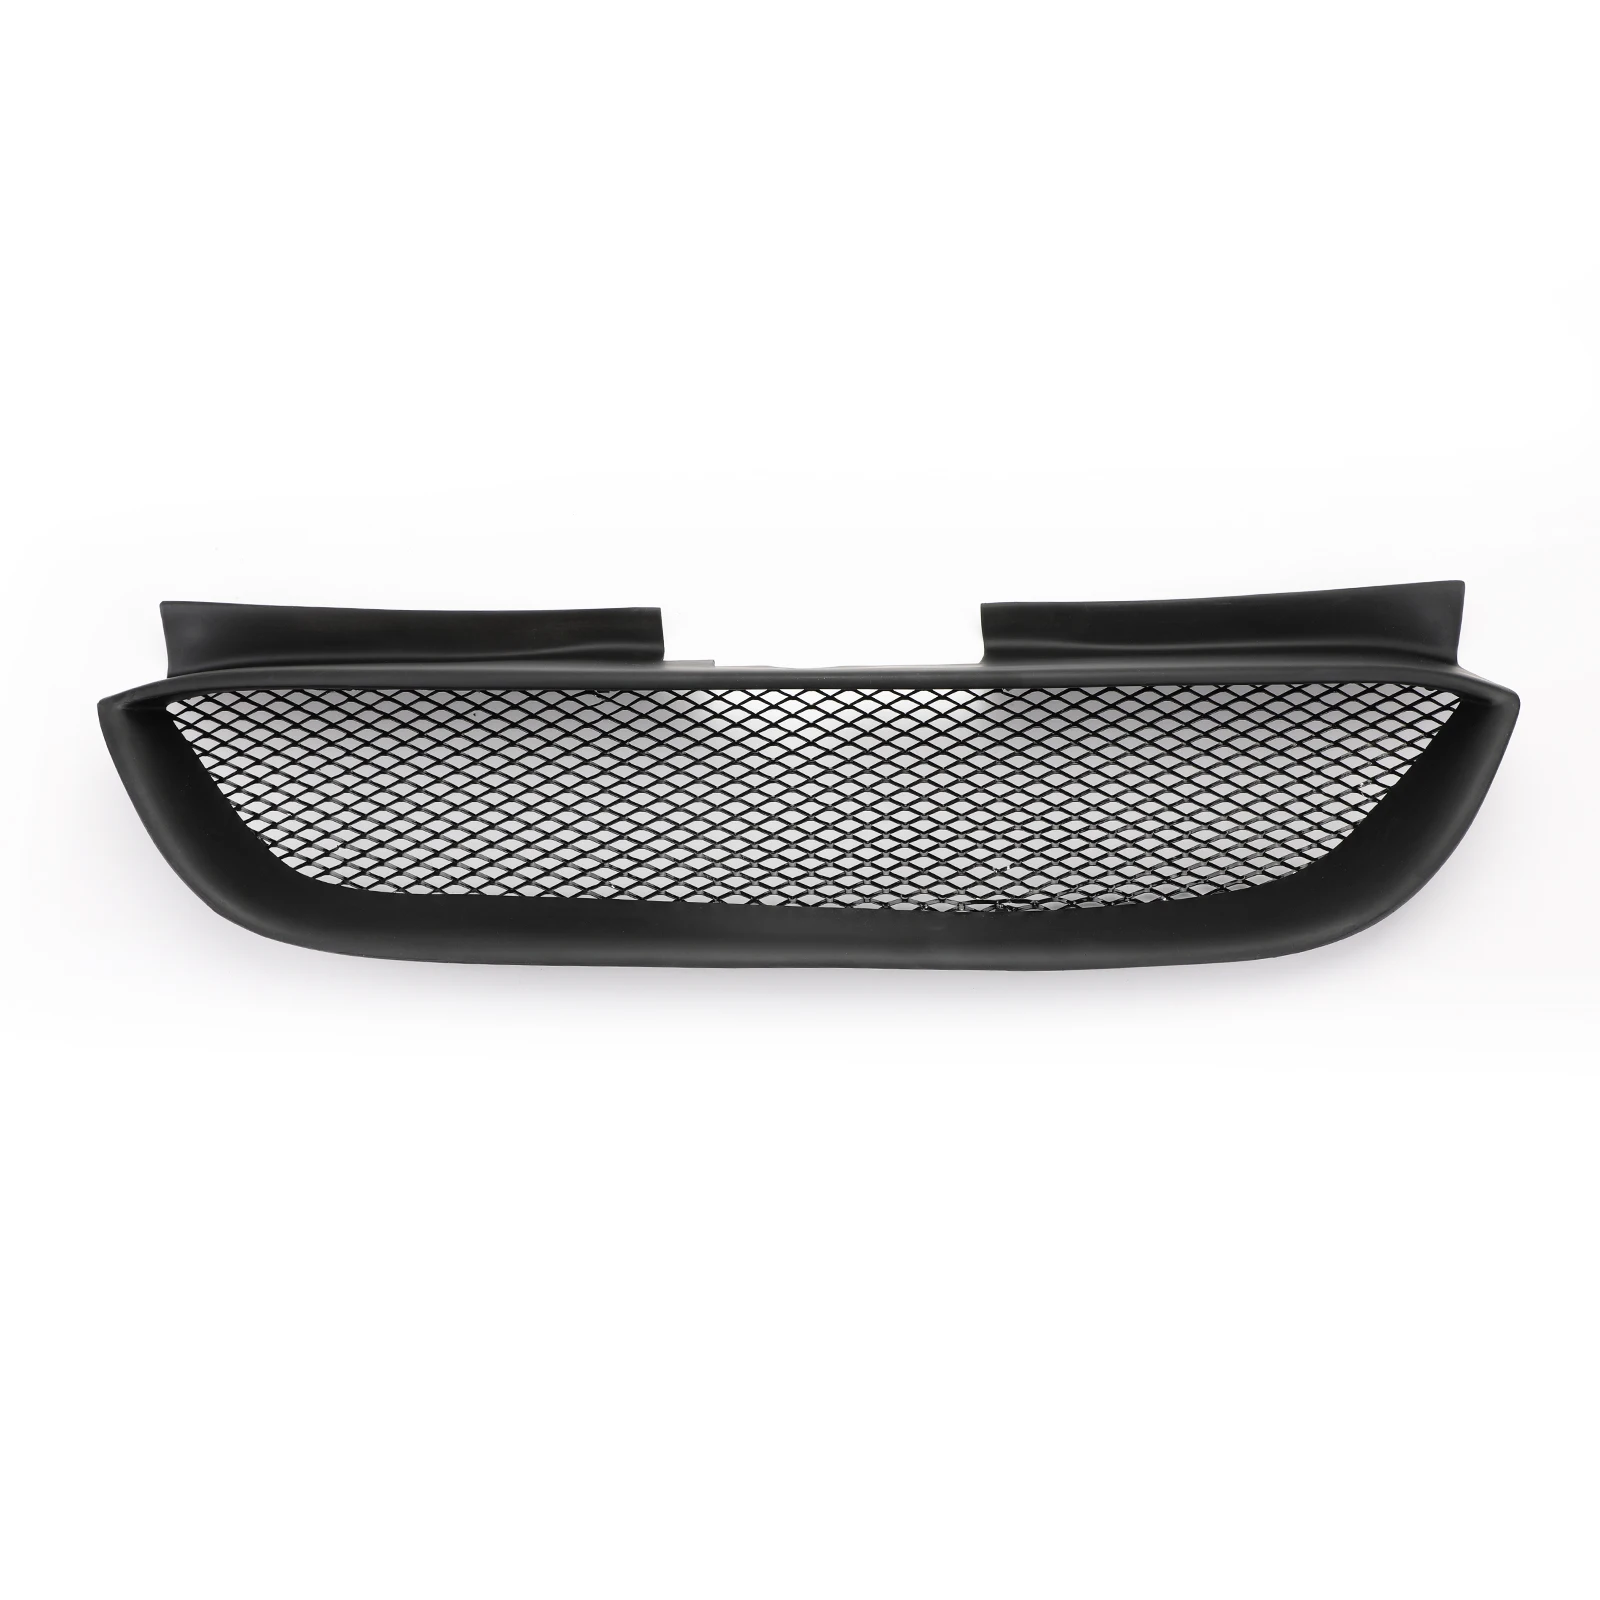 

Areyourshop New Front Hood Mesh Grille Bumper Grill for Hyundai 2009 2010 2011 Genesis Coupe, Black